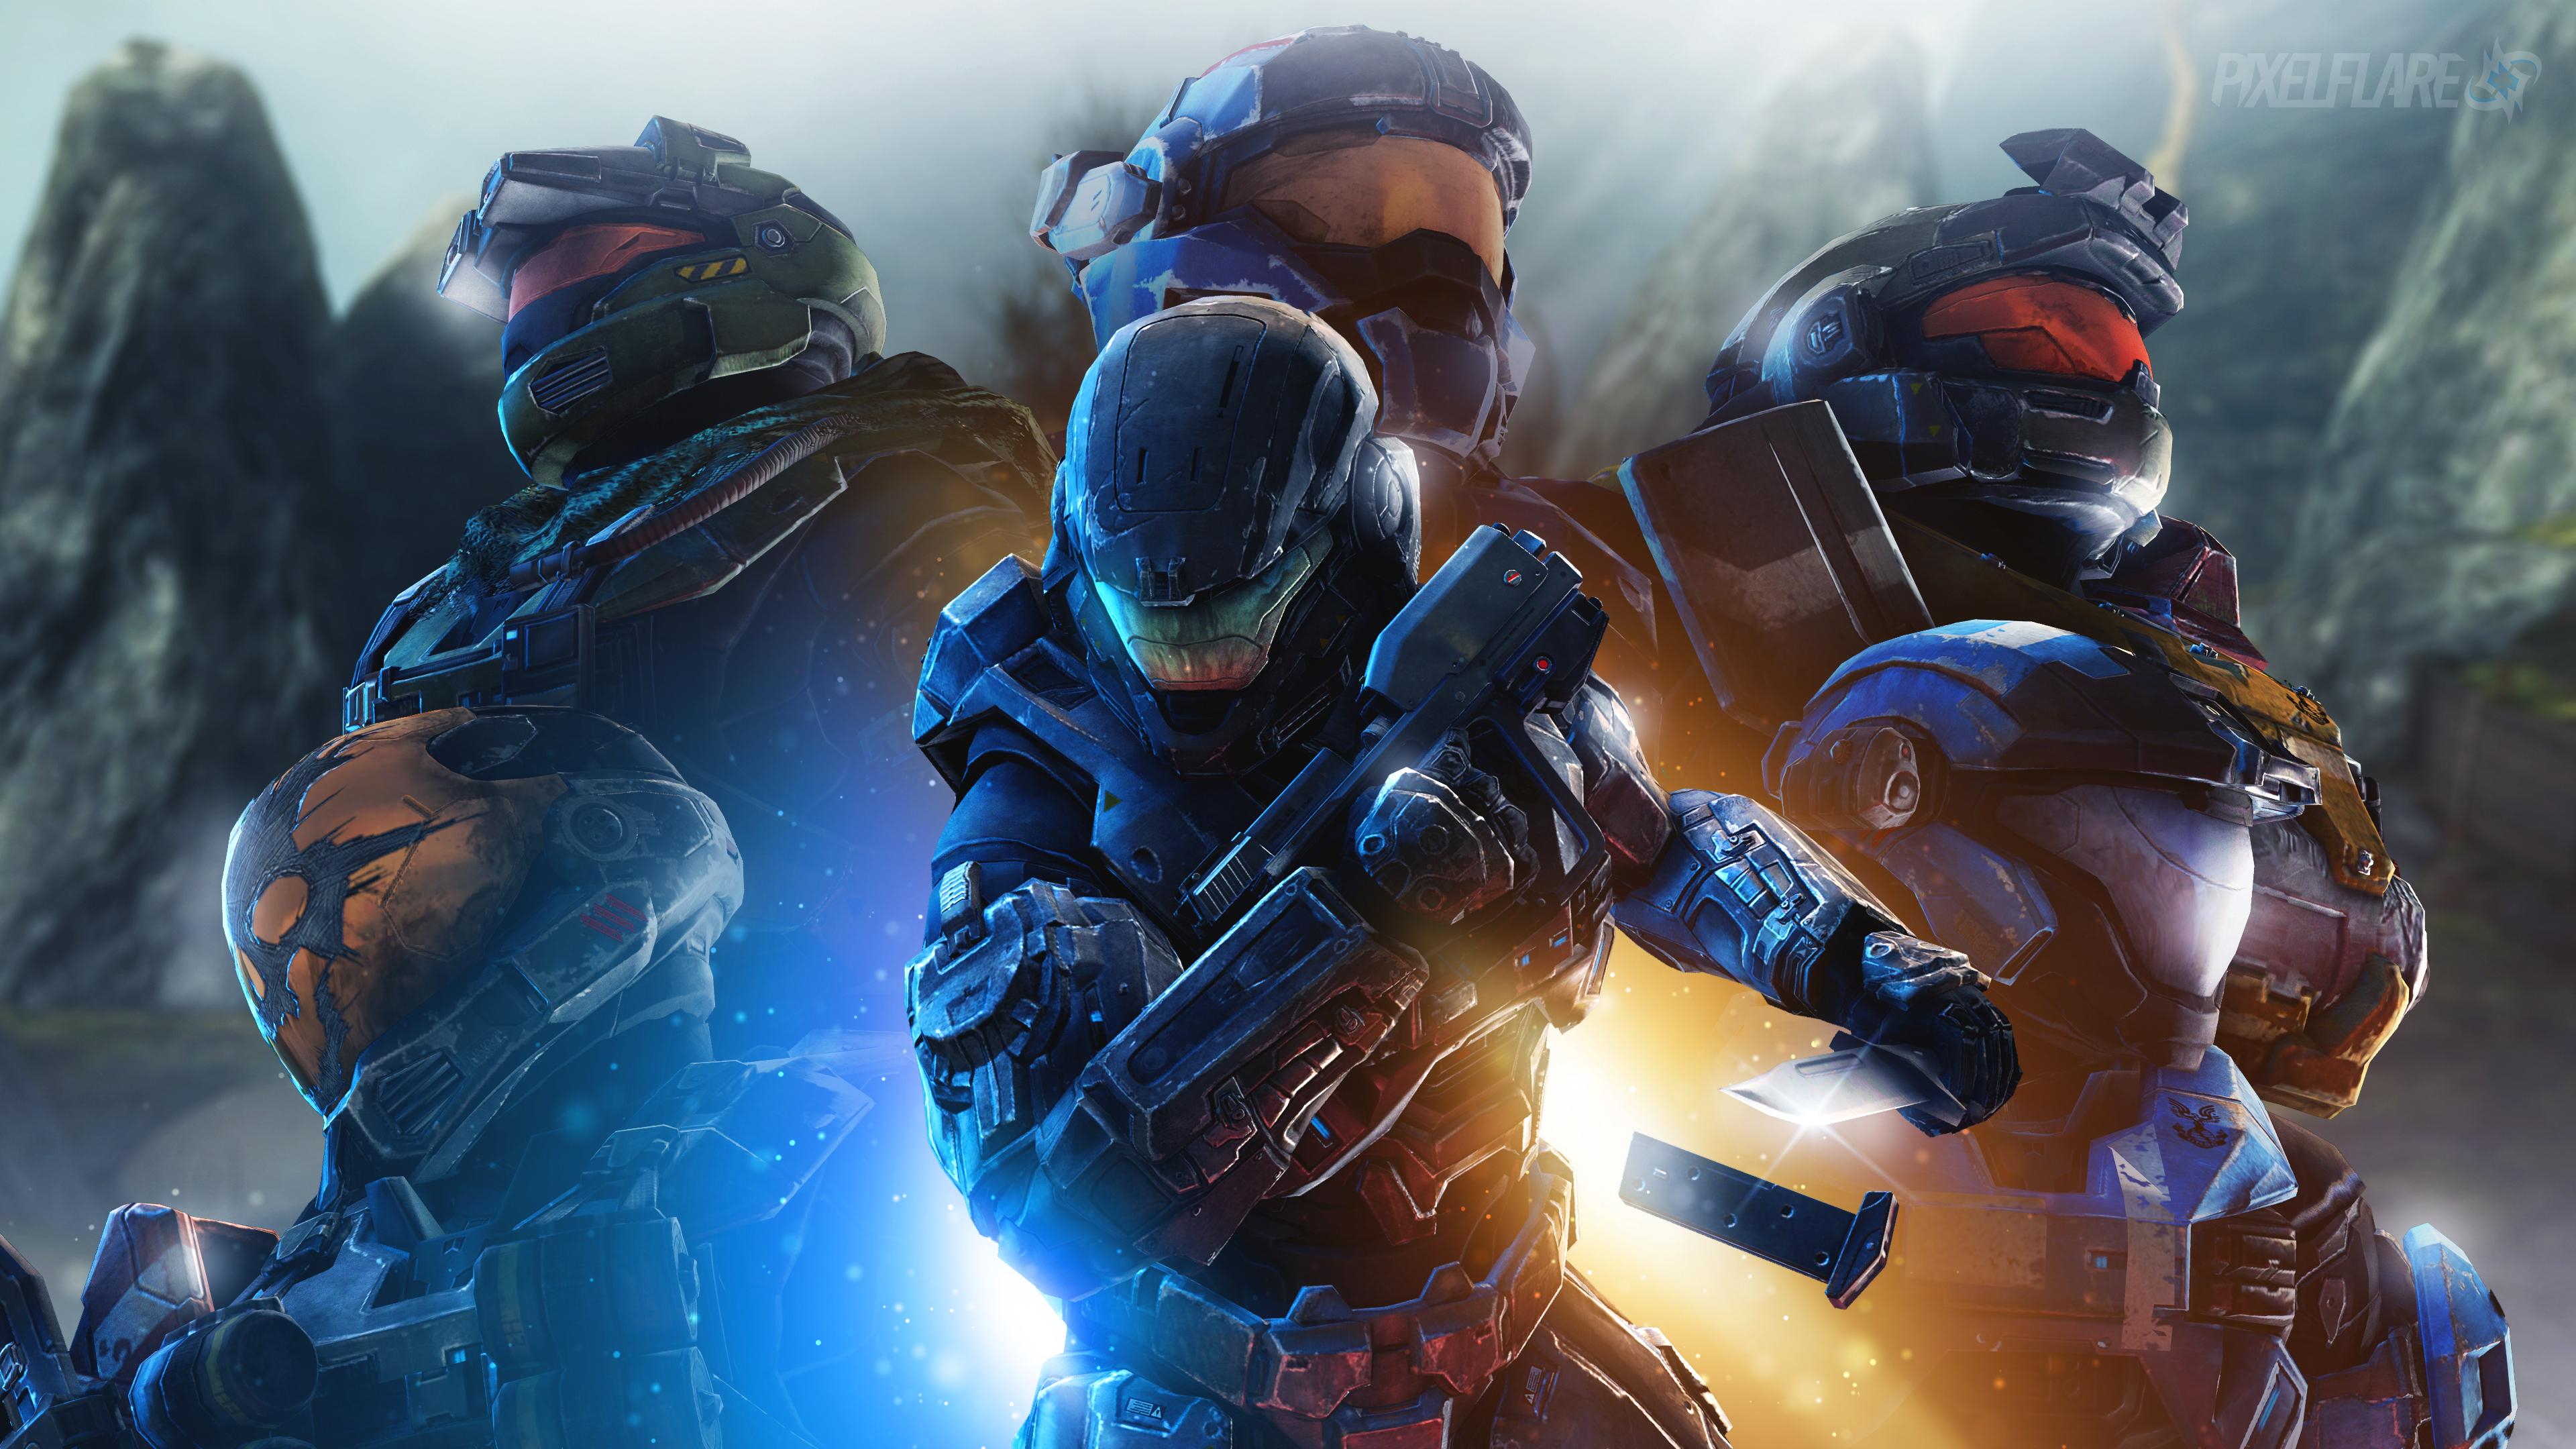 Halo Reach Wallpapers 77 images